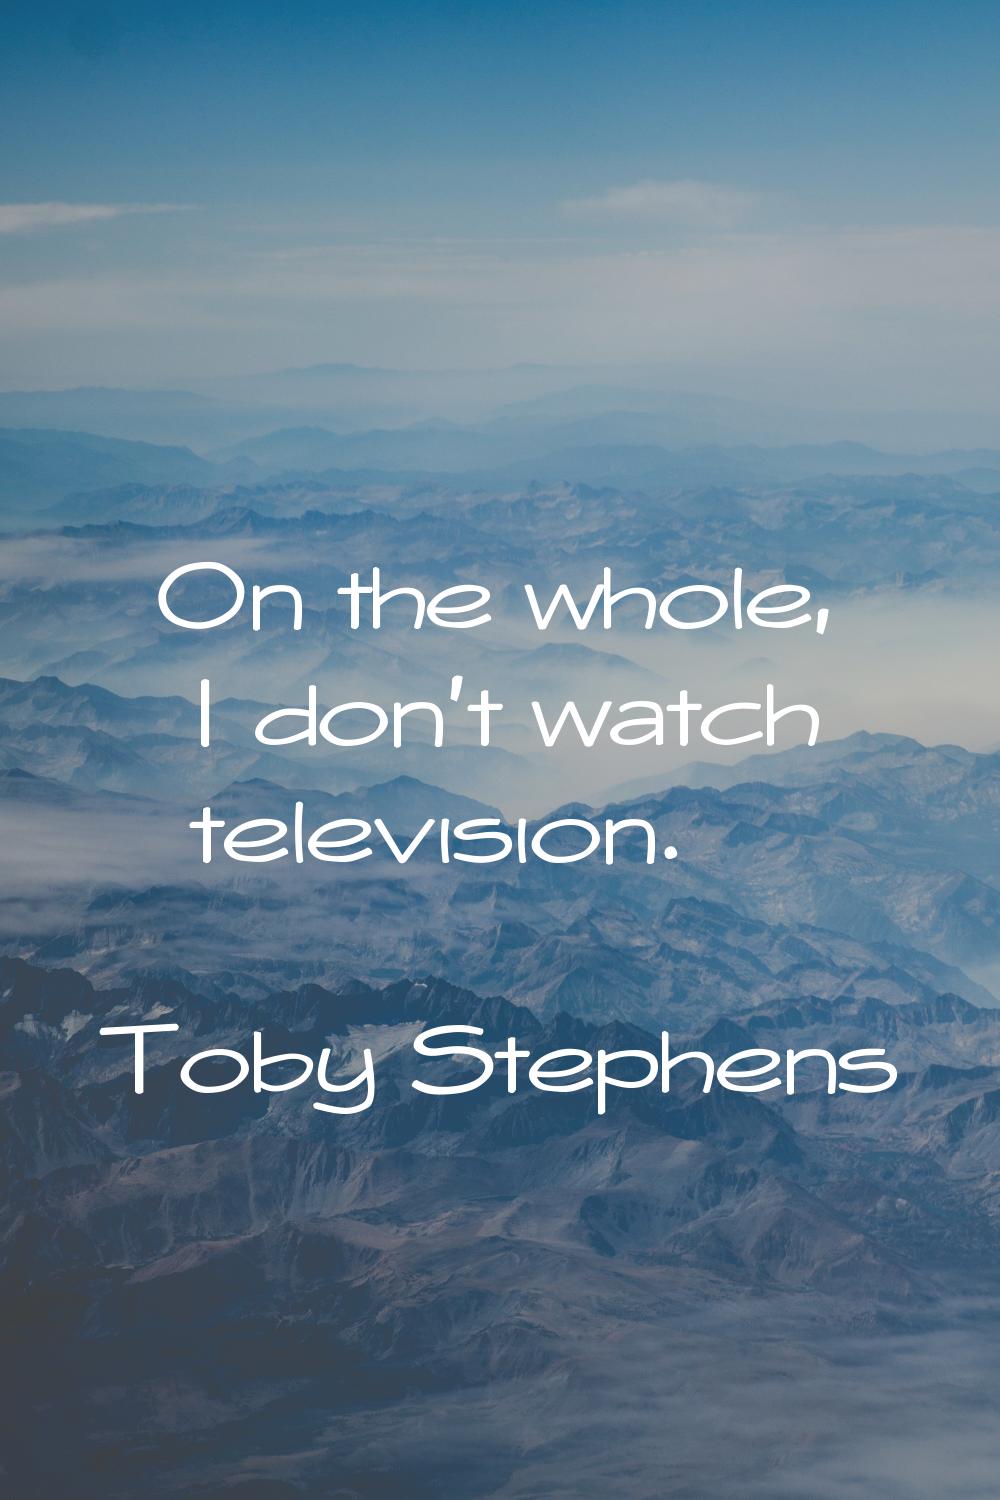 On the whole, I don't watch television.